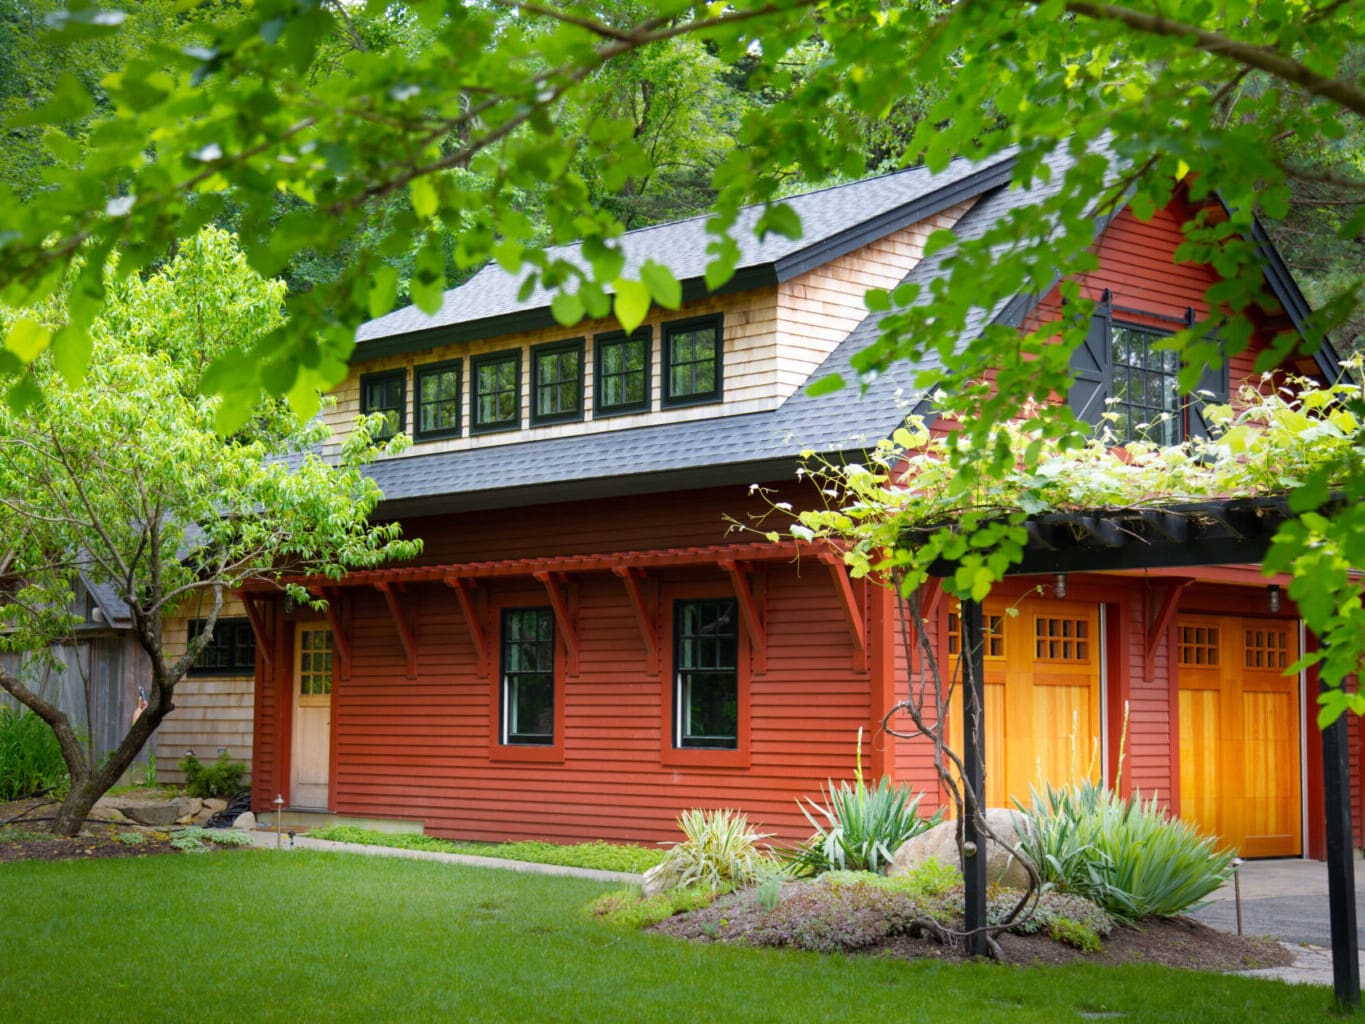 A photo of a barn-style garage with red siding, a red cedar second level, and clear vertical grain fir wooden garage doors.